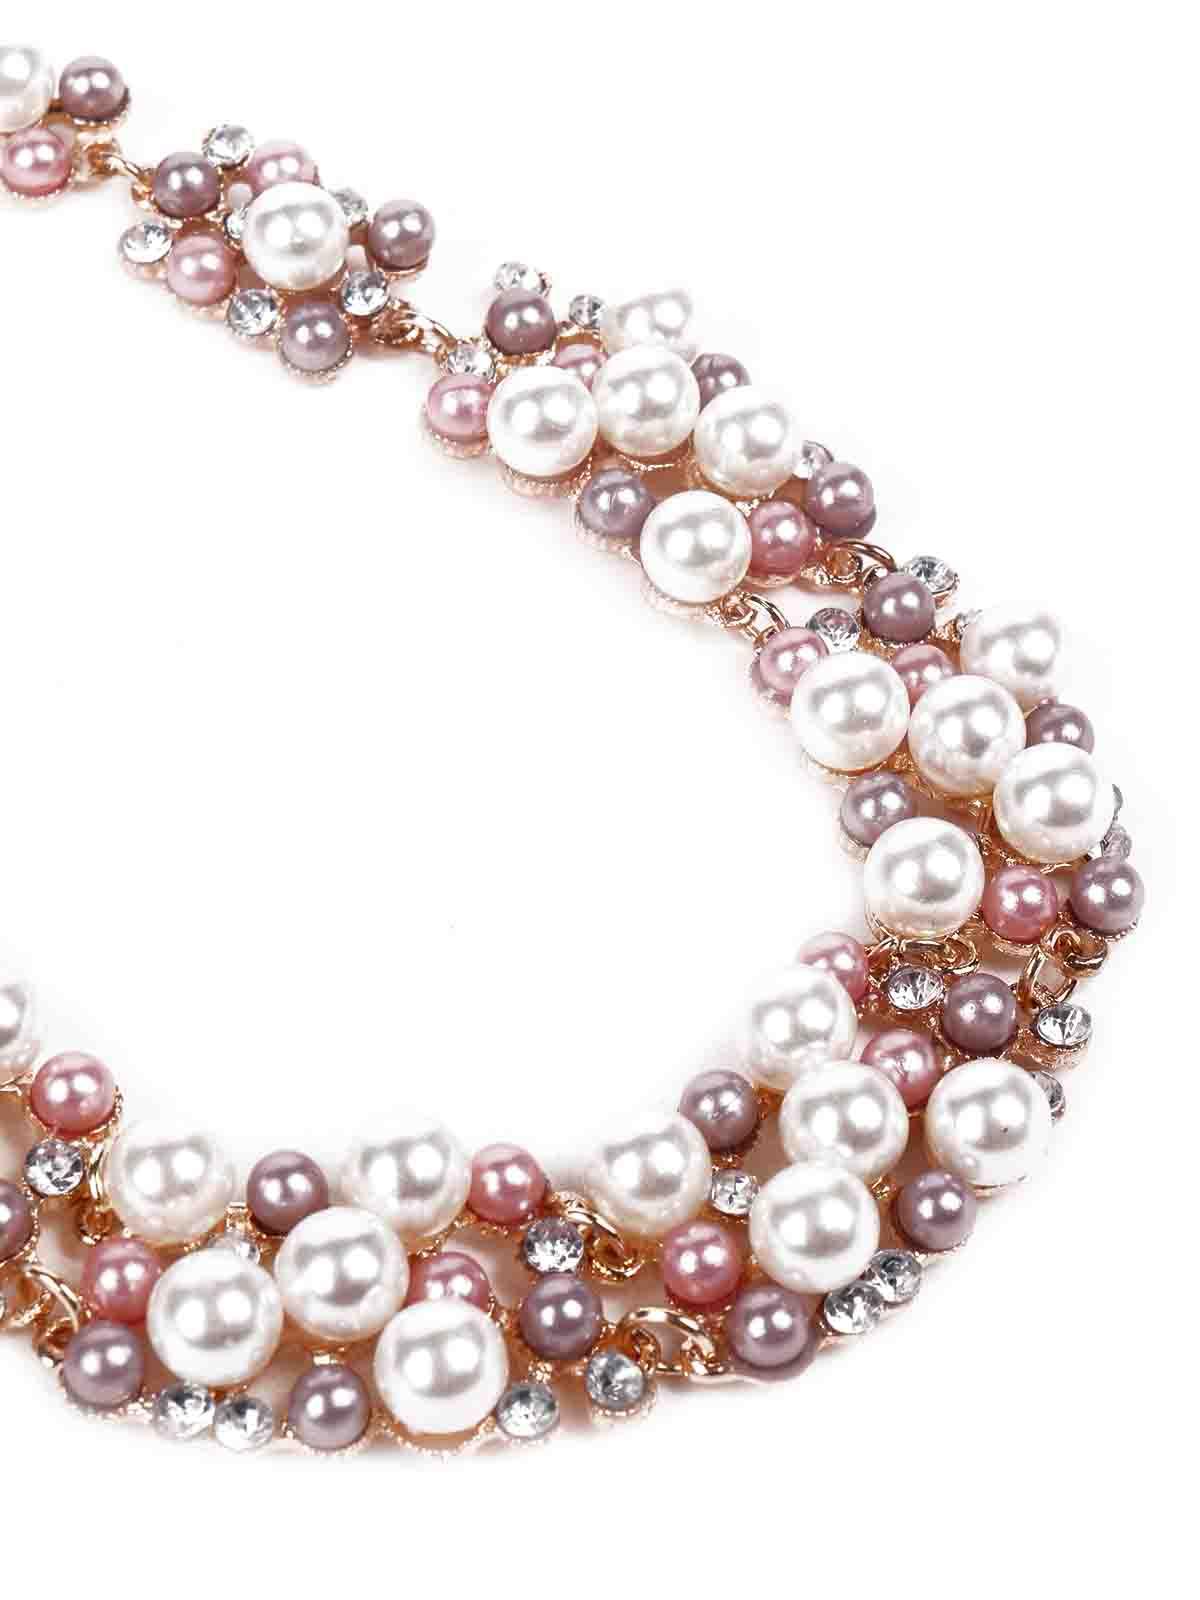 Women's Gorgeous Beaded Necklace - Rose Gold And White - Odette